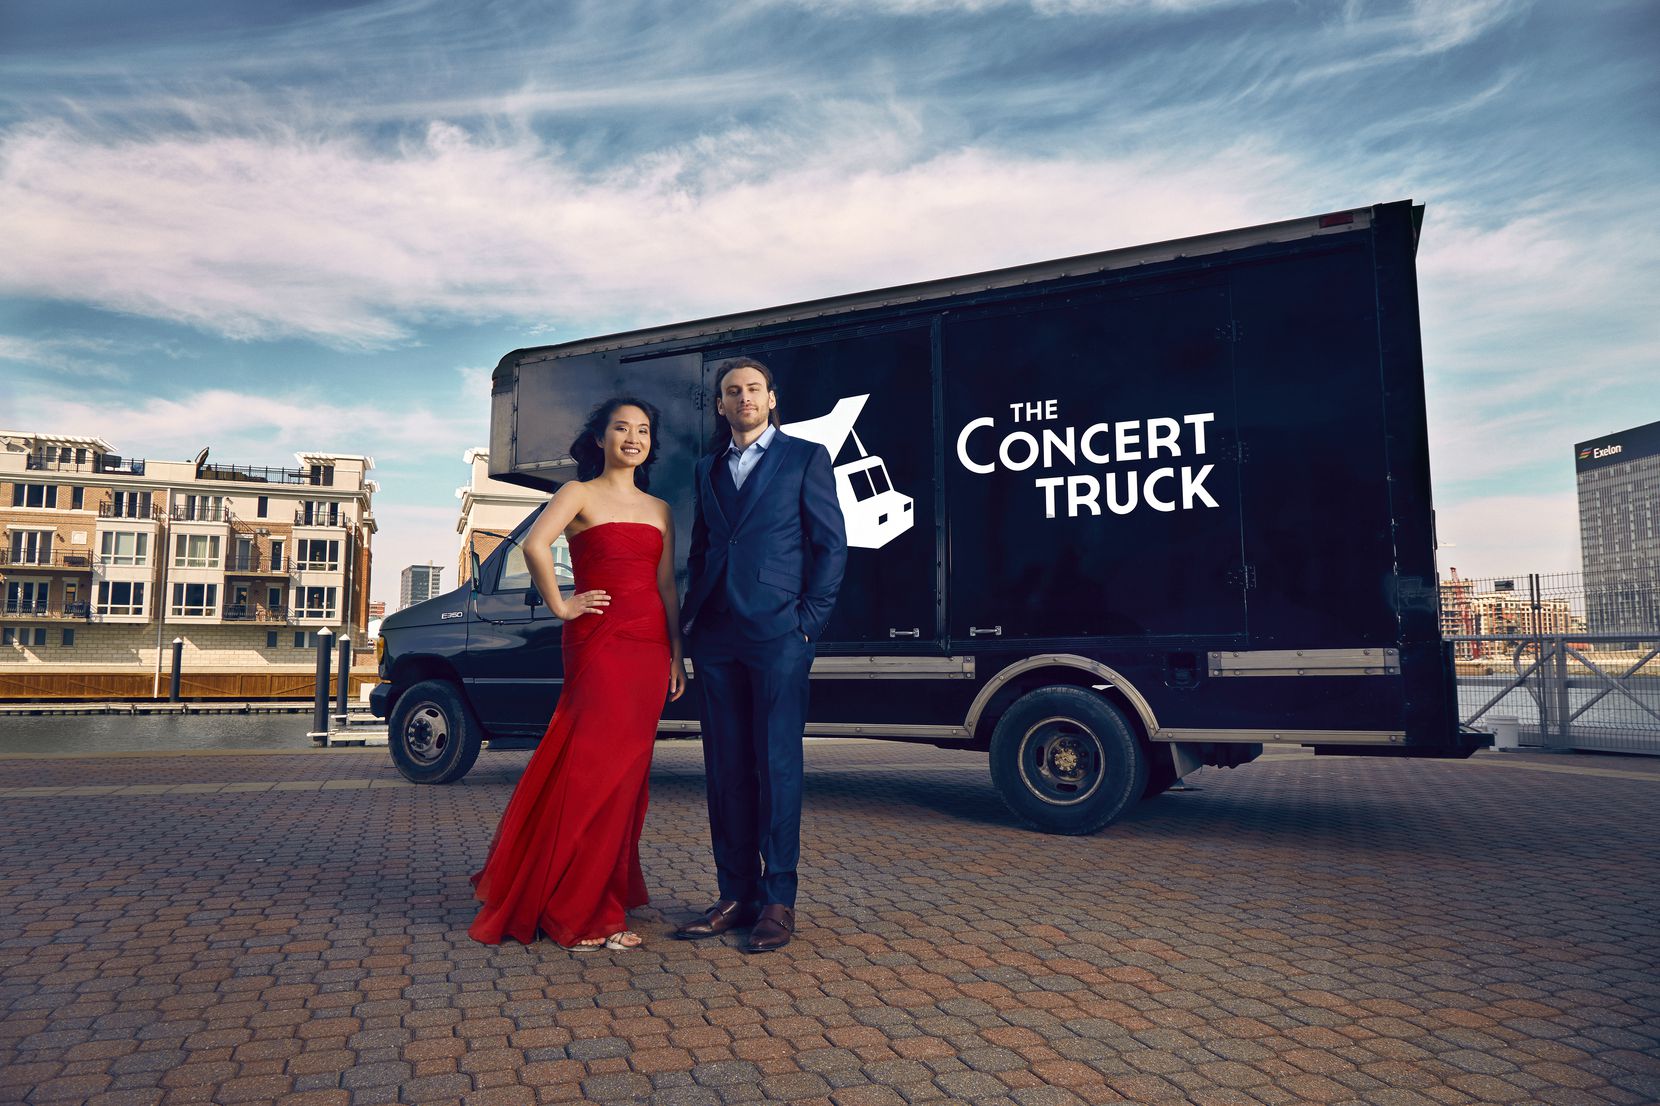 The Concert Truck, founded in 2016 by concert pianists Susan Zhang and Nick Luby, is a mobile concert stage that brings classical chamber music directly to communities. 